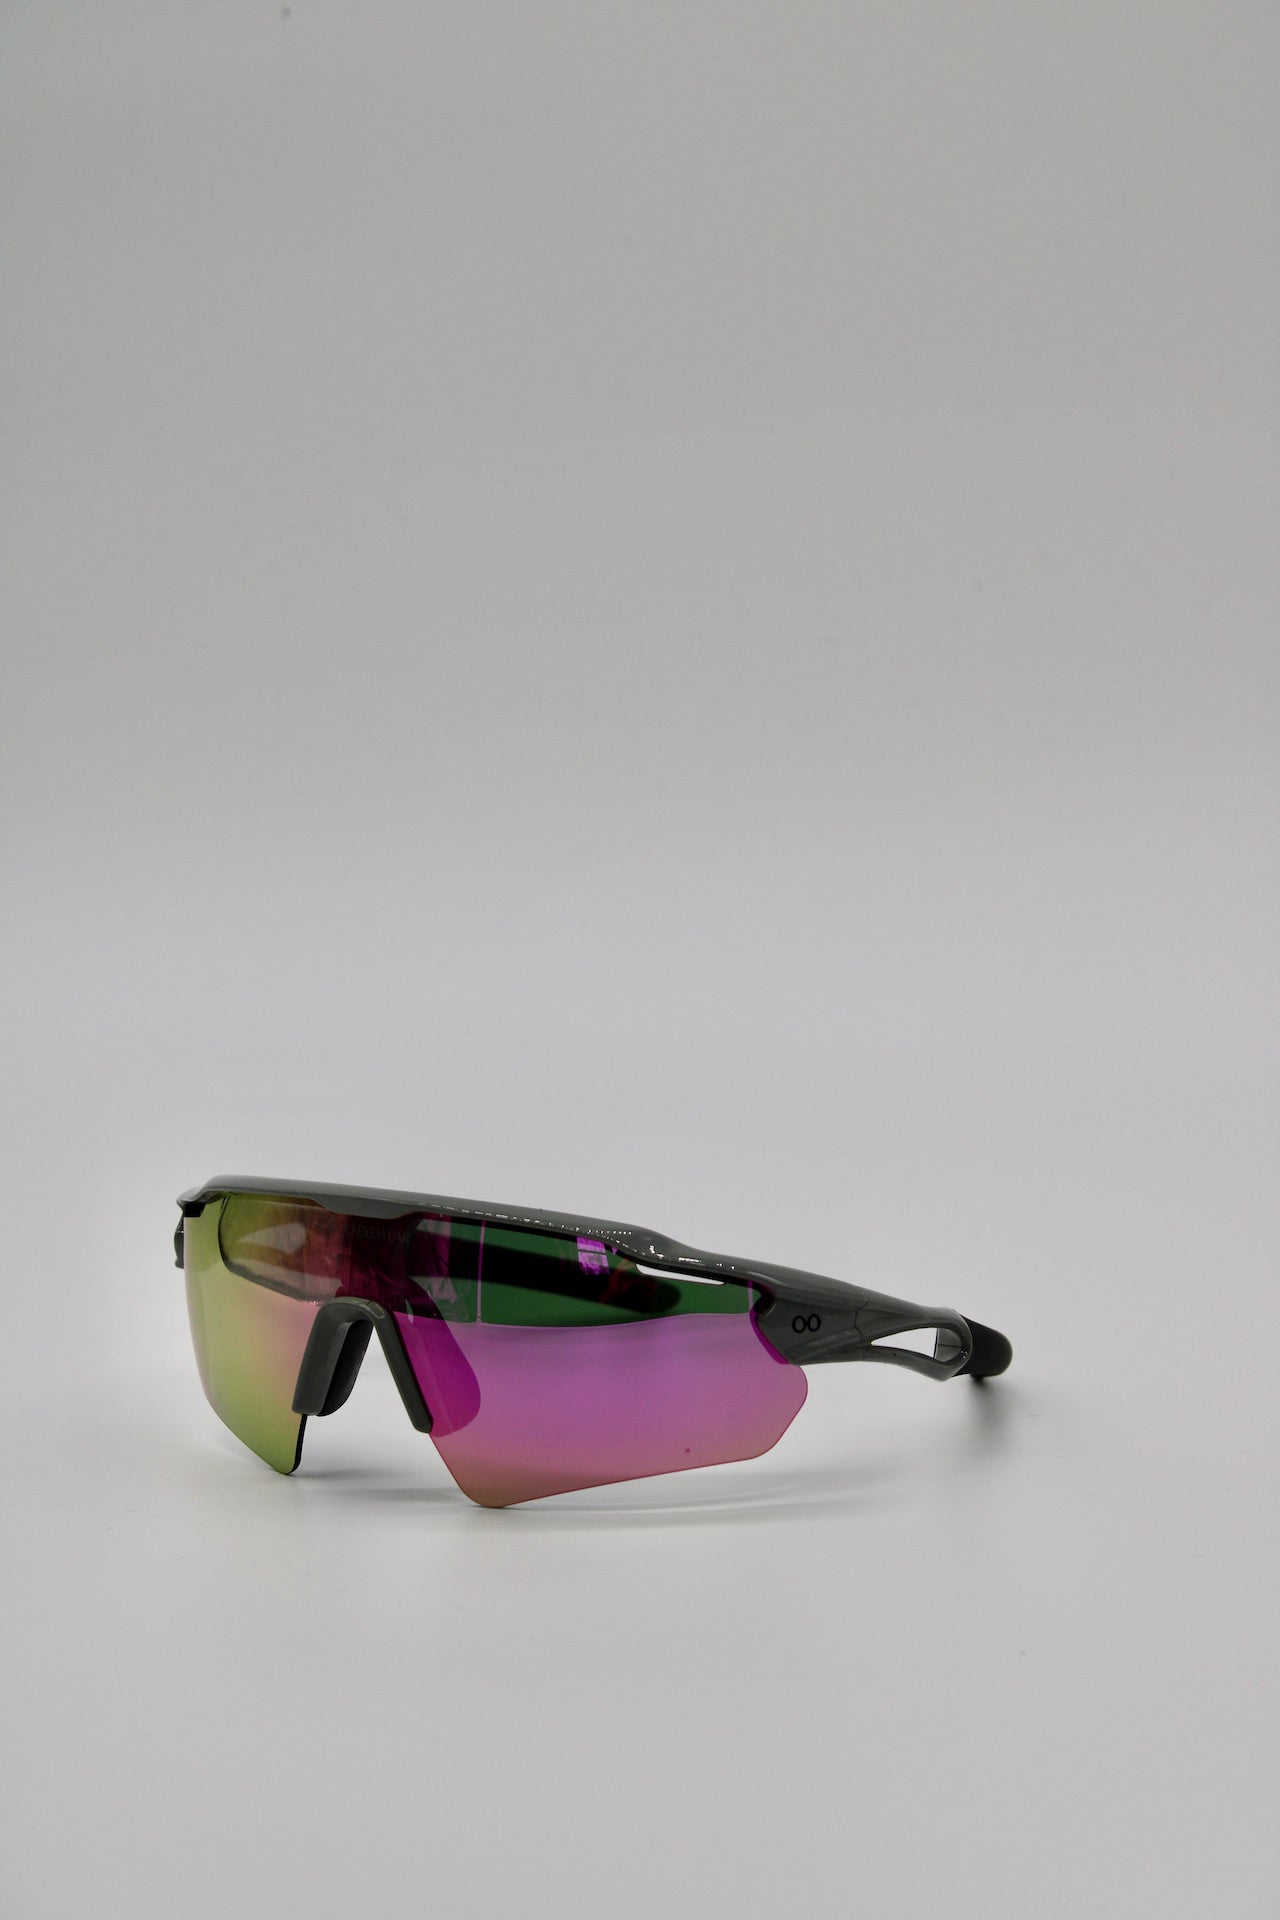 LIMITED EDITION: 516 Escapist Grey Frame with Black Detail and Three Lenses